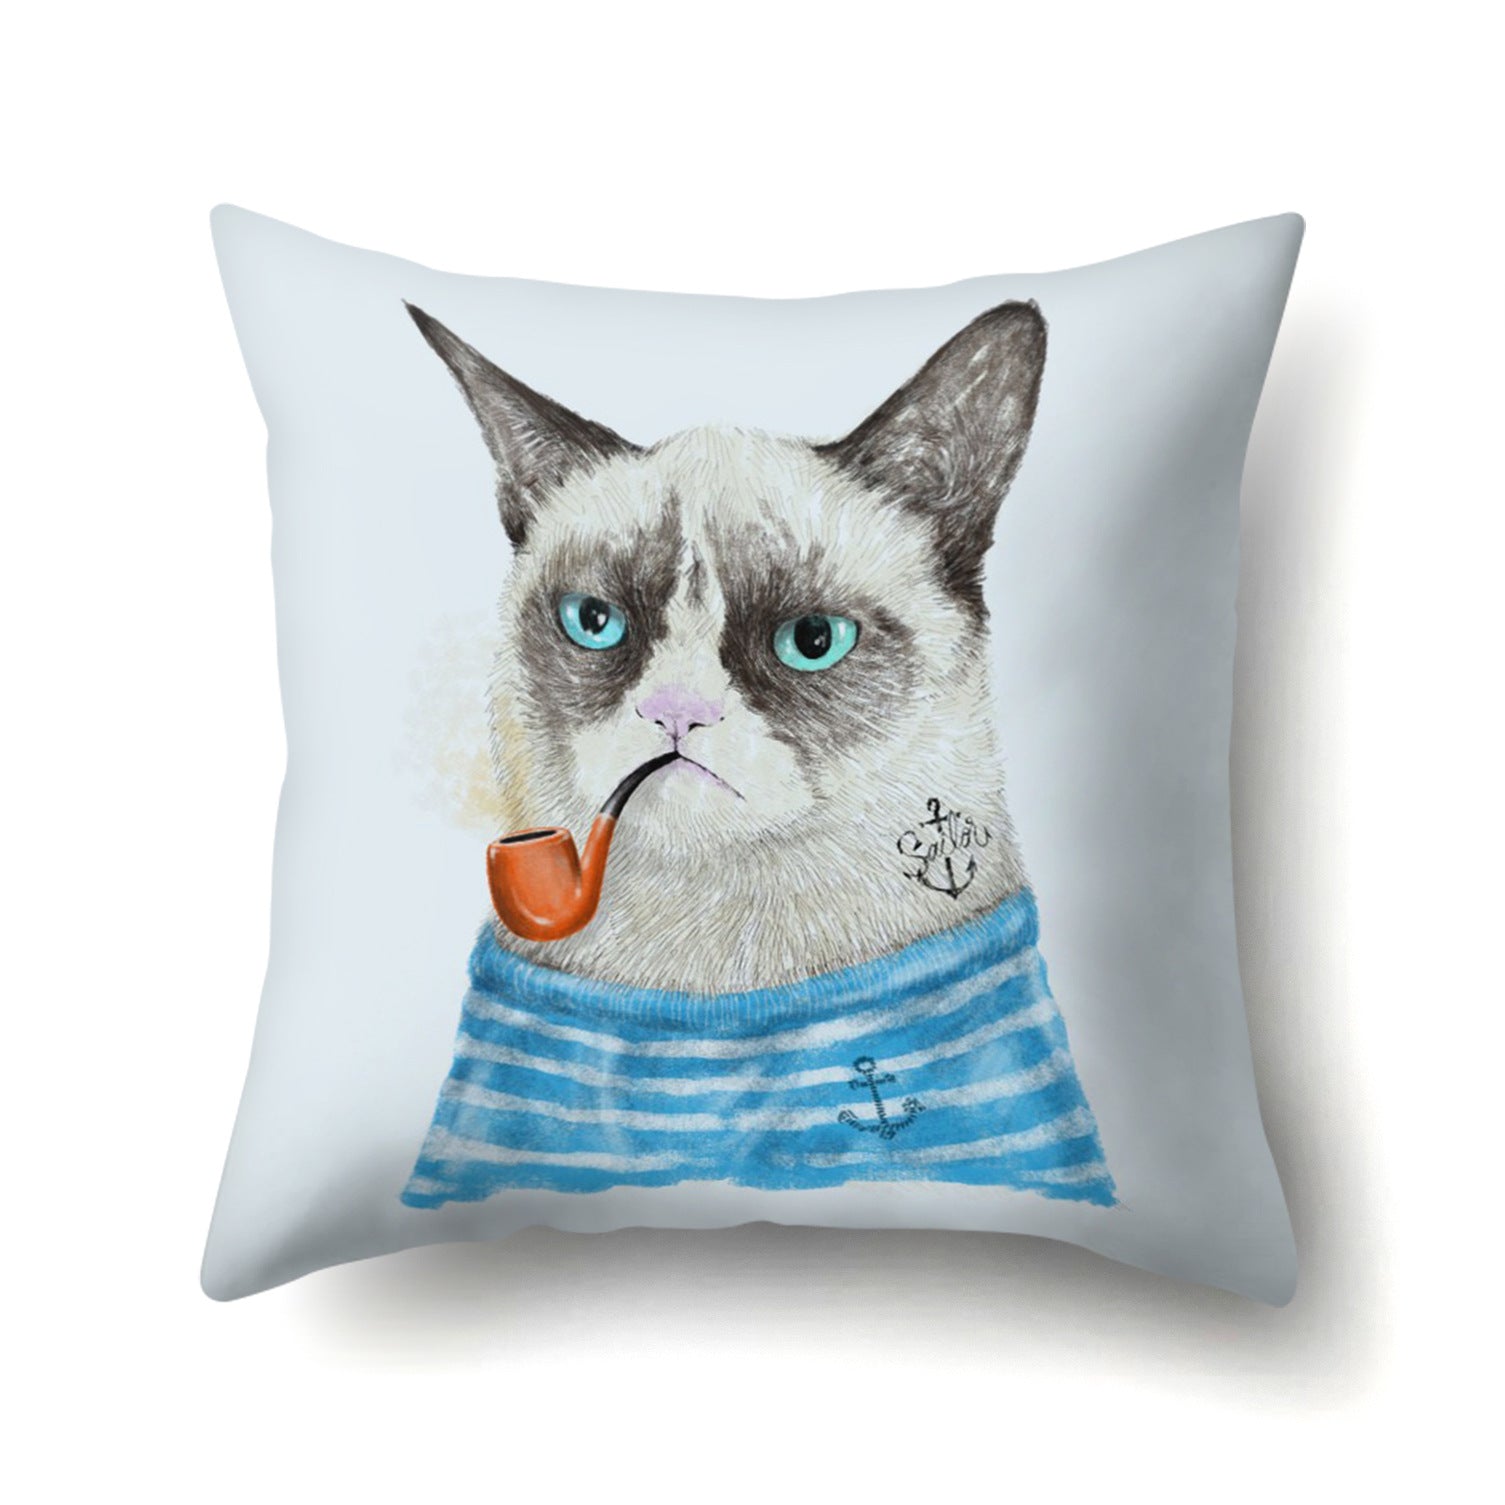 Cats Tribute Cushion Covers